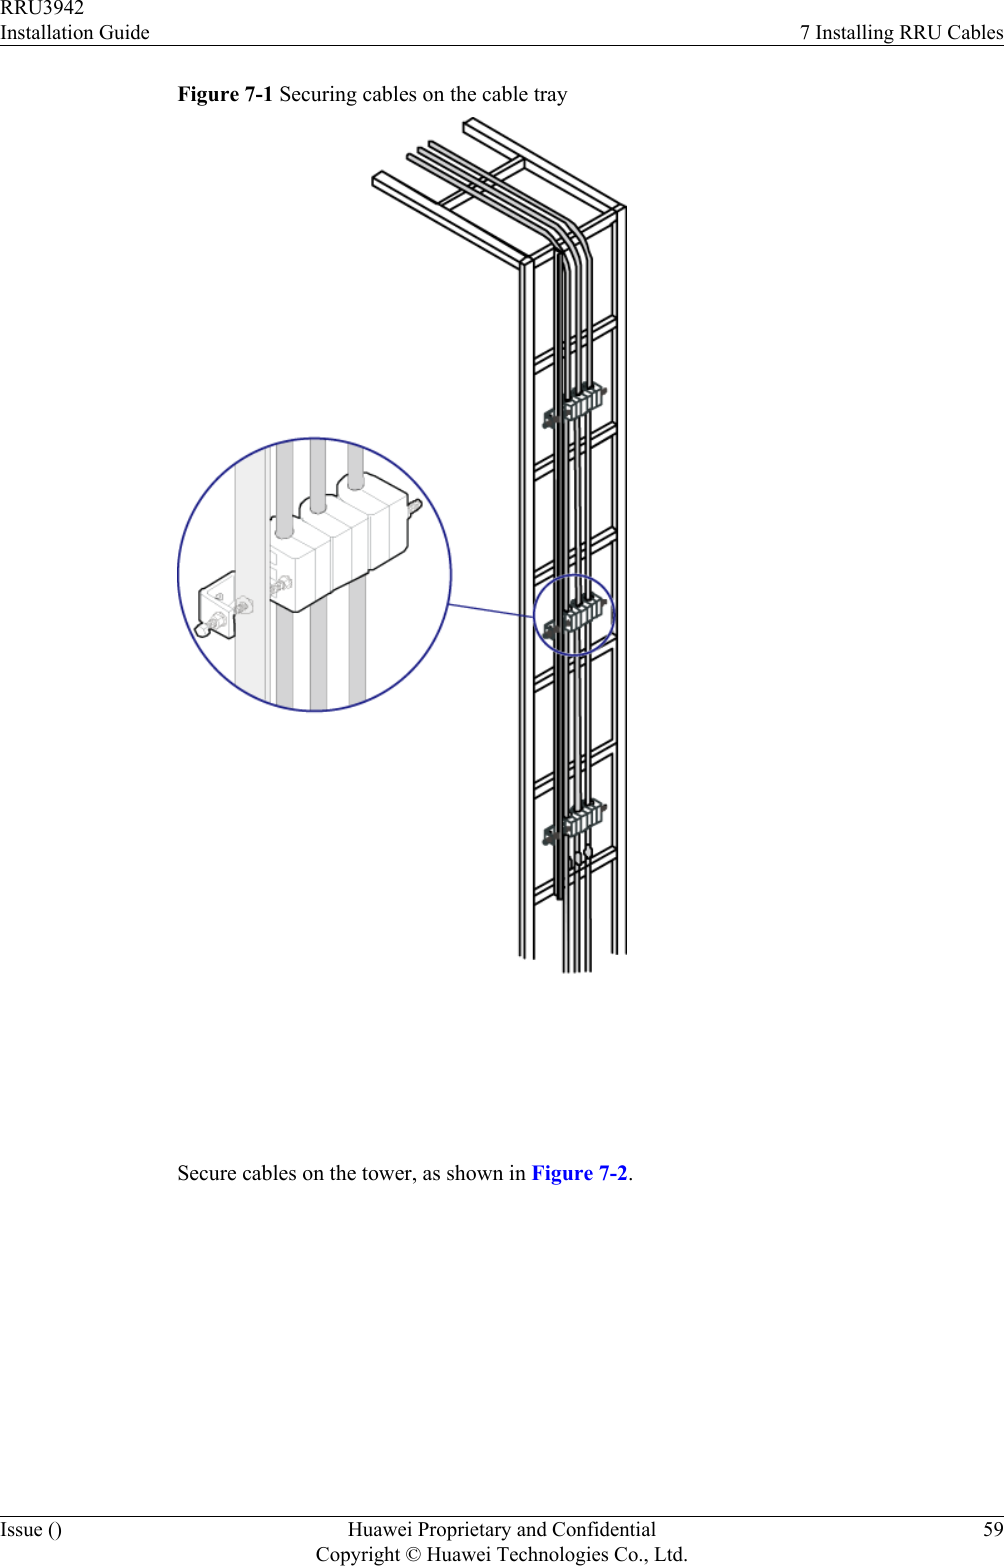 Figure 7-1 Securing cables on the cable tray Secure cables on the tower, as shown in Figure 7-2.RRU3942Installation Guide 7 Installing RRU CablesIssue () Huawei Proprietary and ConfidentialCopyright © Huawei Technologies Co., Ltd.59